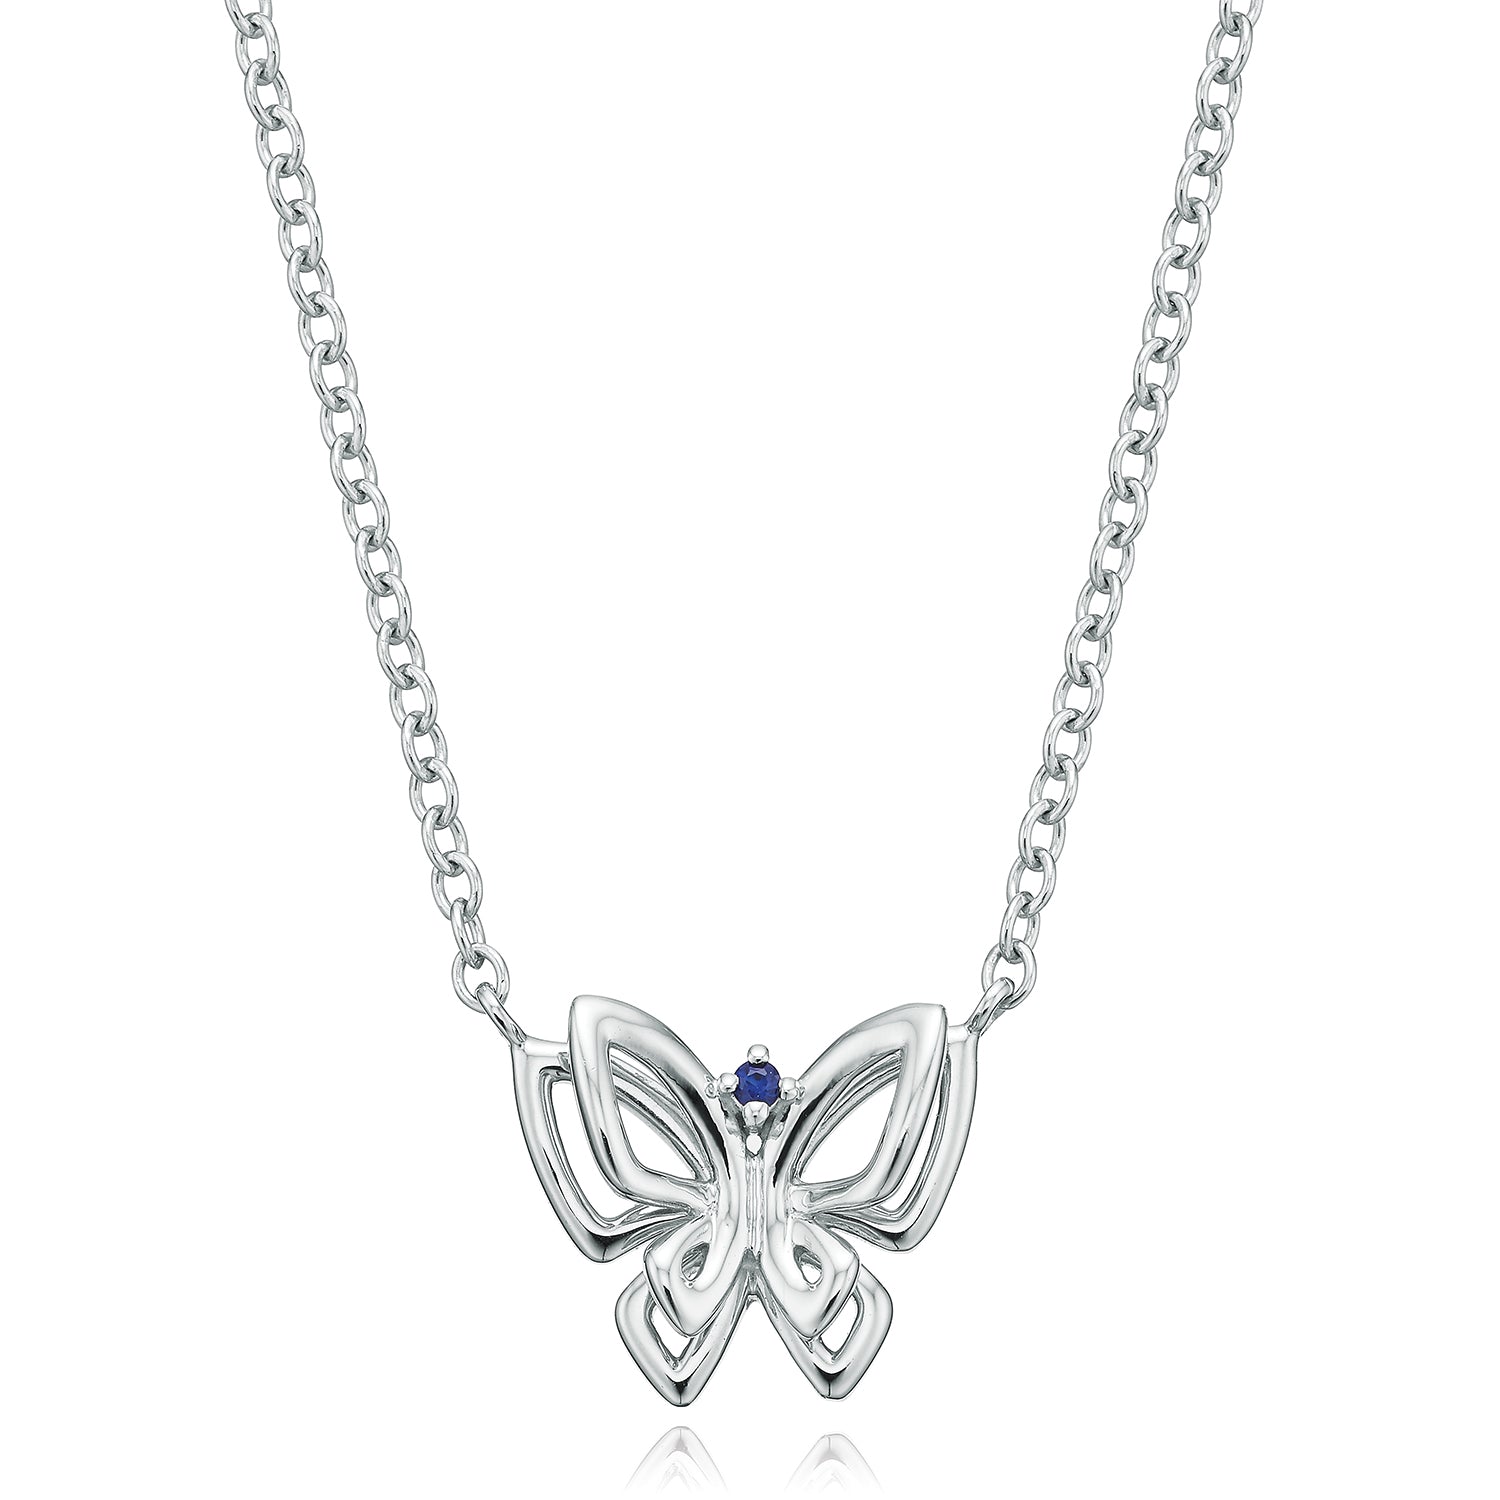 Vera Wang Love Sterling Silver Heart Necklace – Mazzucchelli's